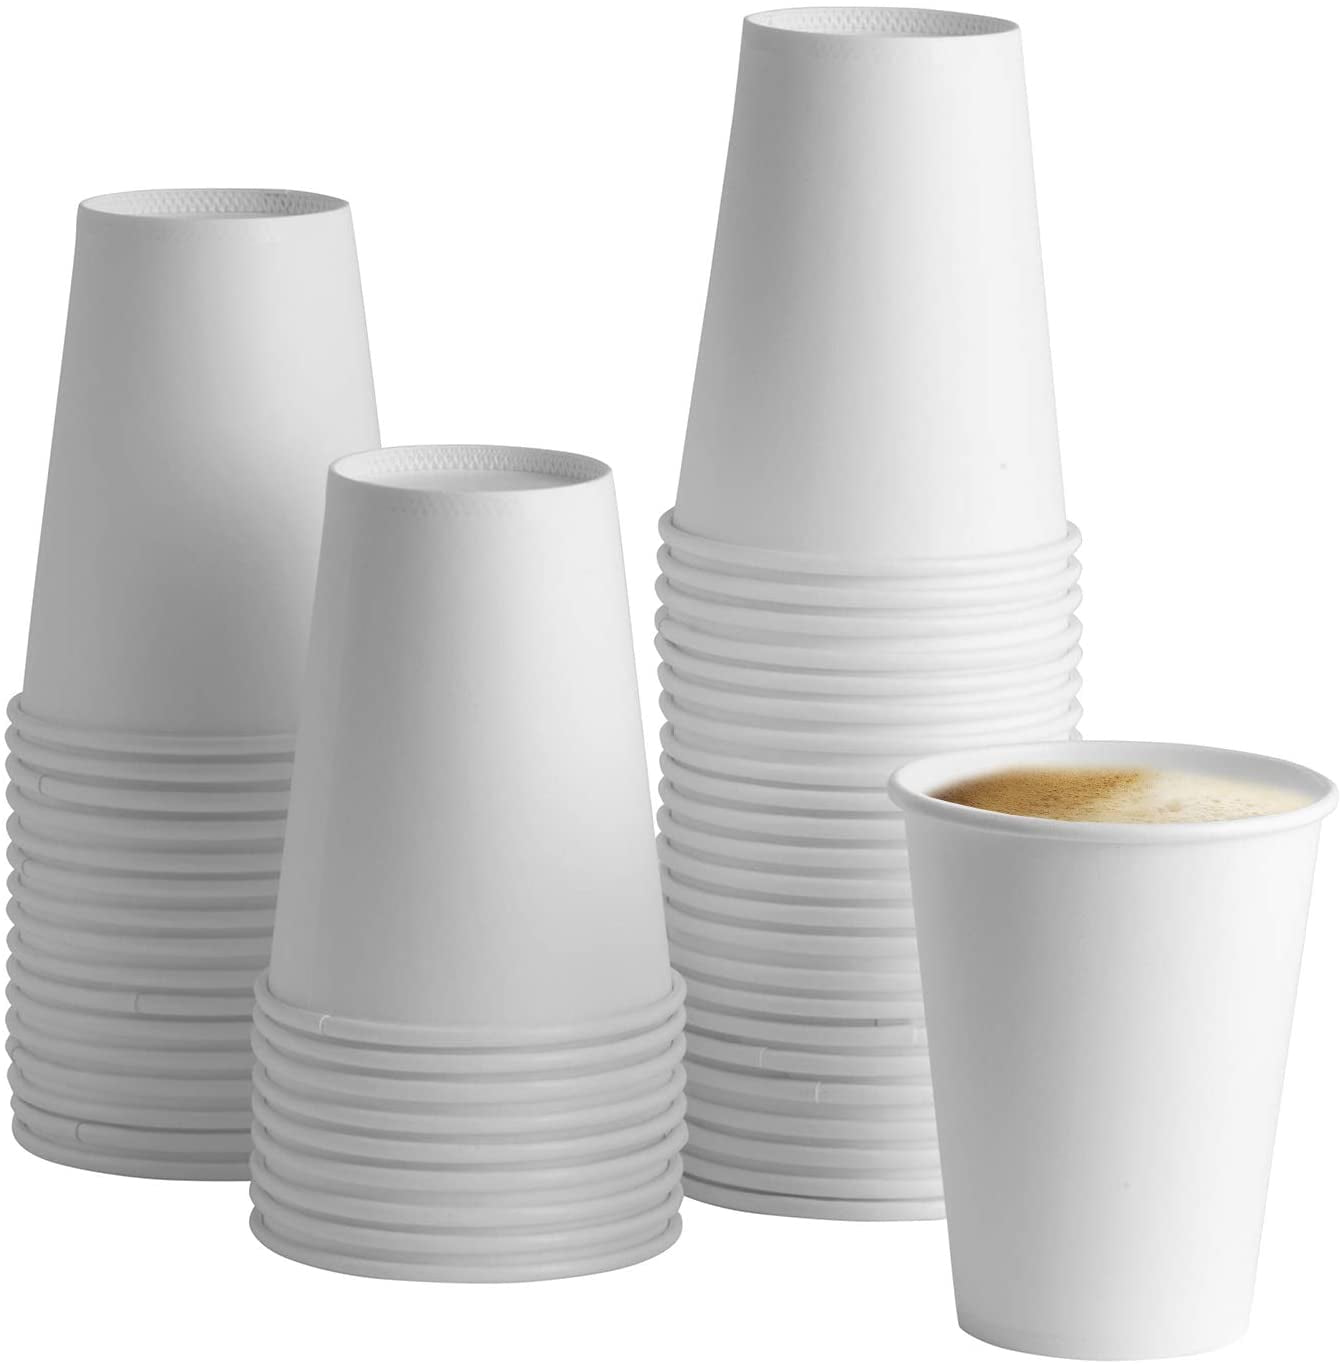 8 oz Paper Hot Cups Disposable Coffee cups Brown Design 80 count